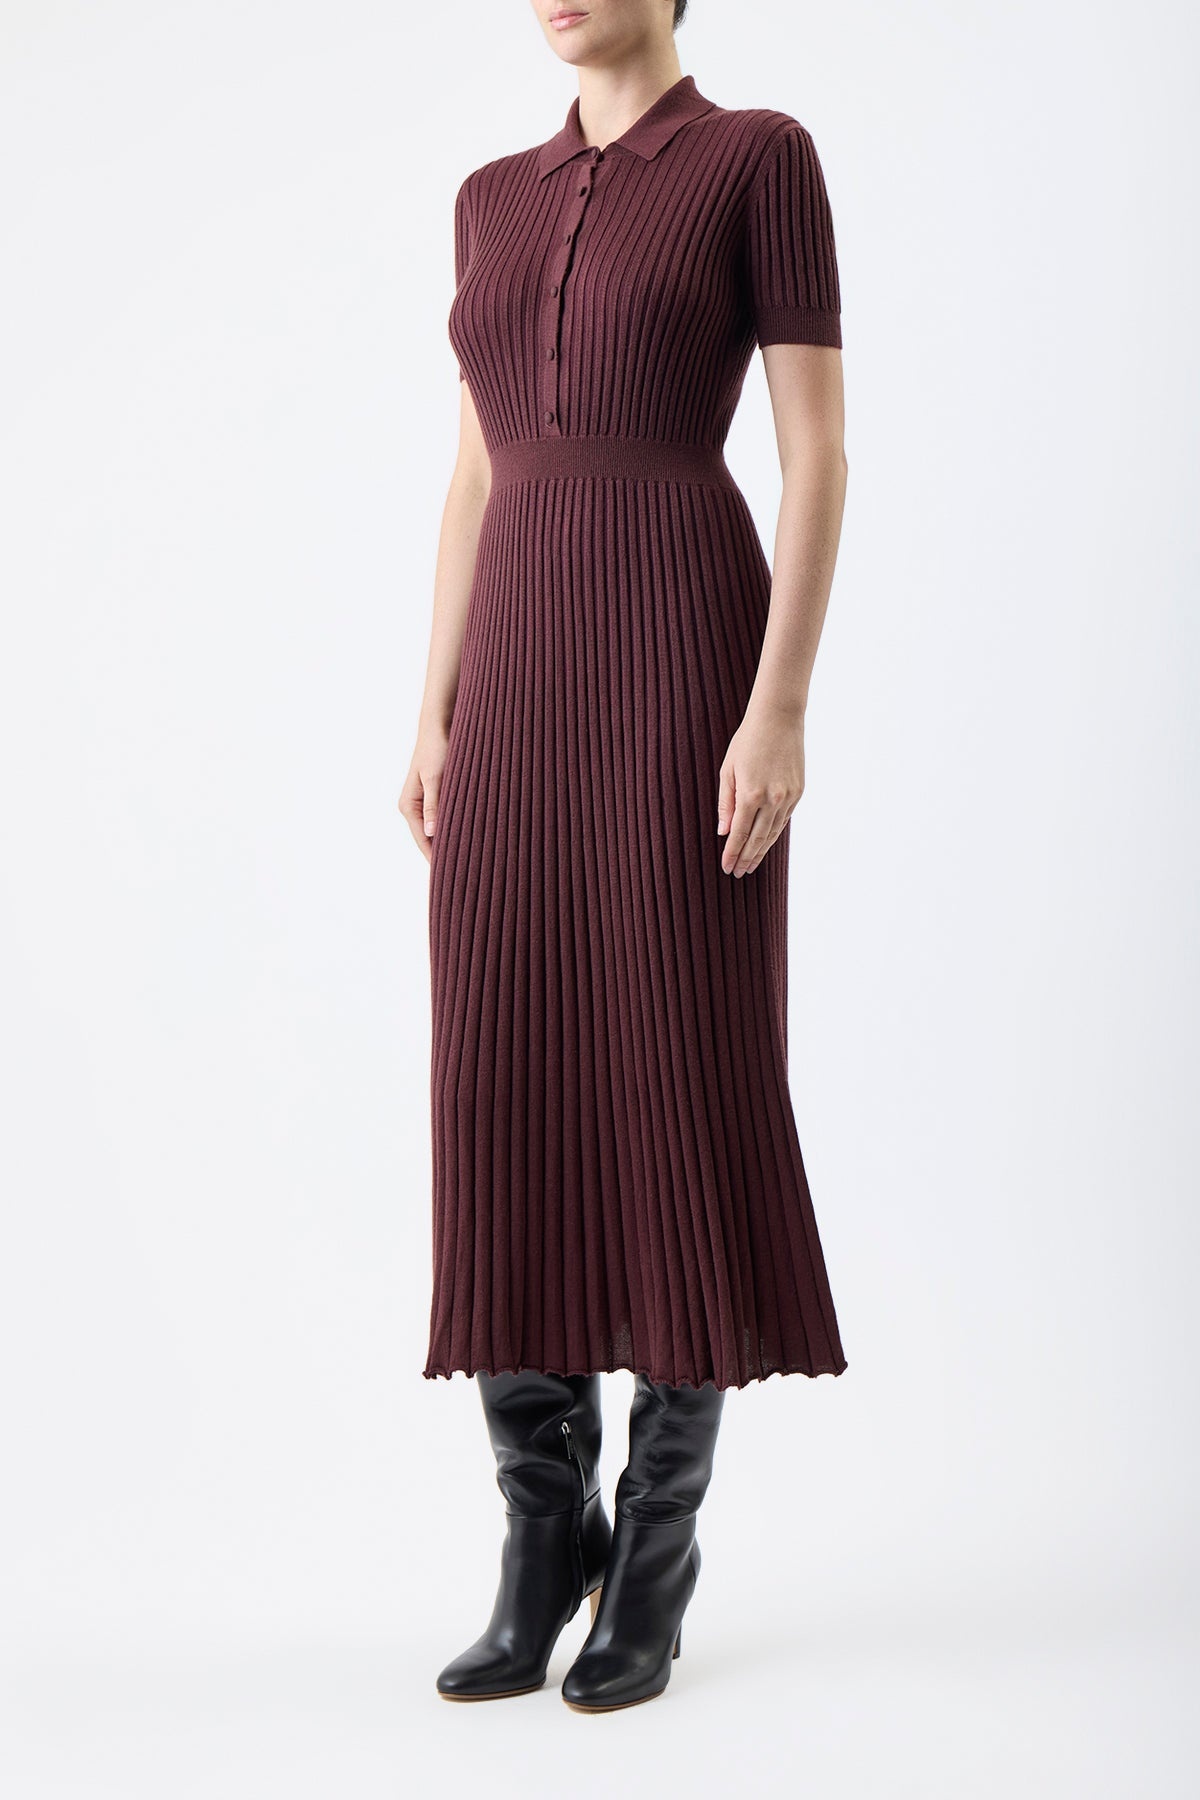 Amor Ribbed Dress in Deep Bordeaux Silk Cashmere - 3